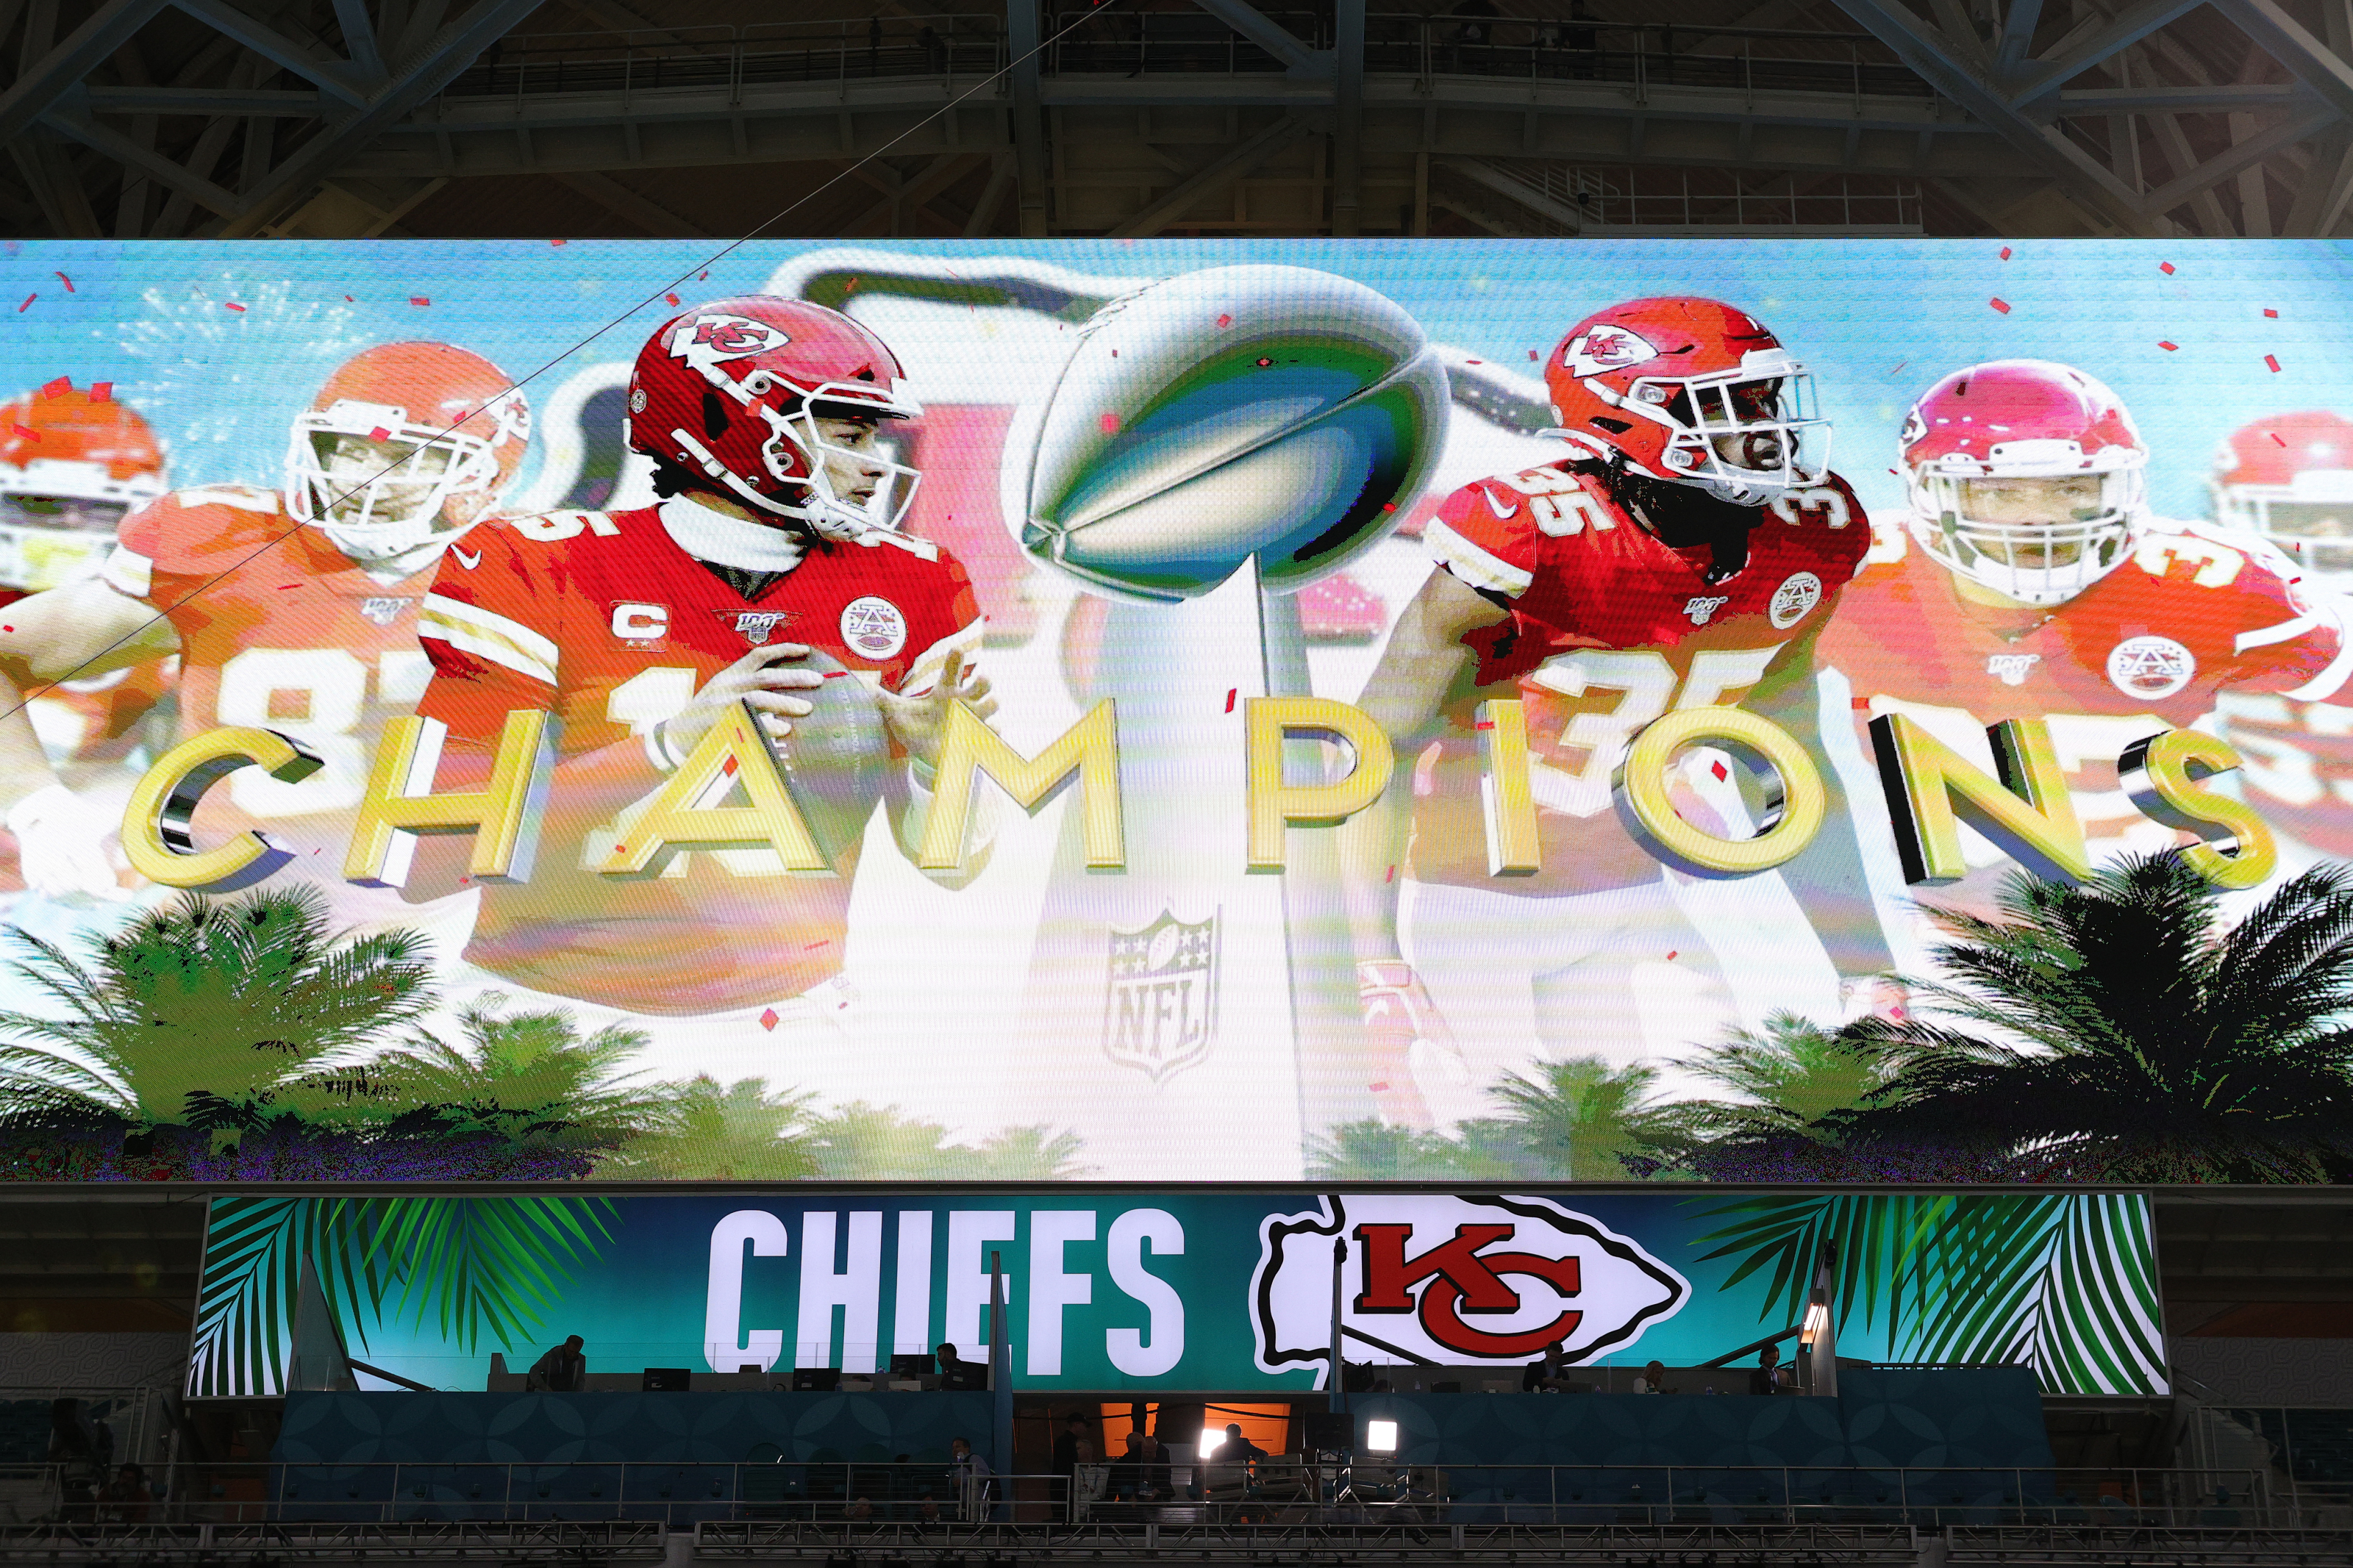 Super Bowl LIV first of many titles coming for Kansas City Chiefs